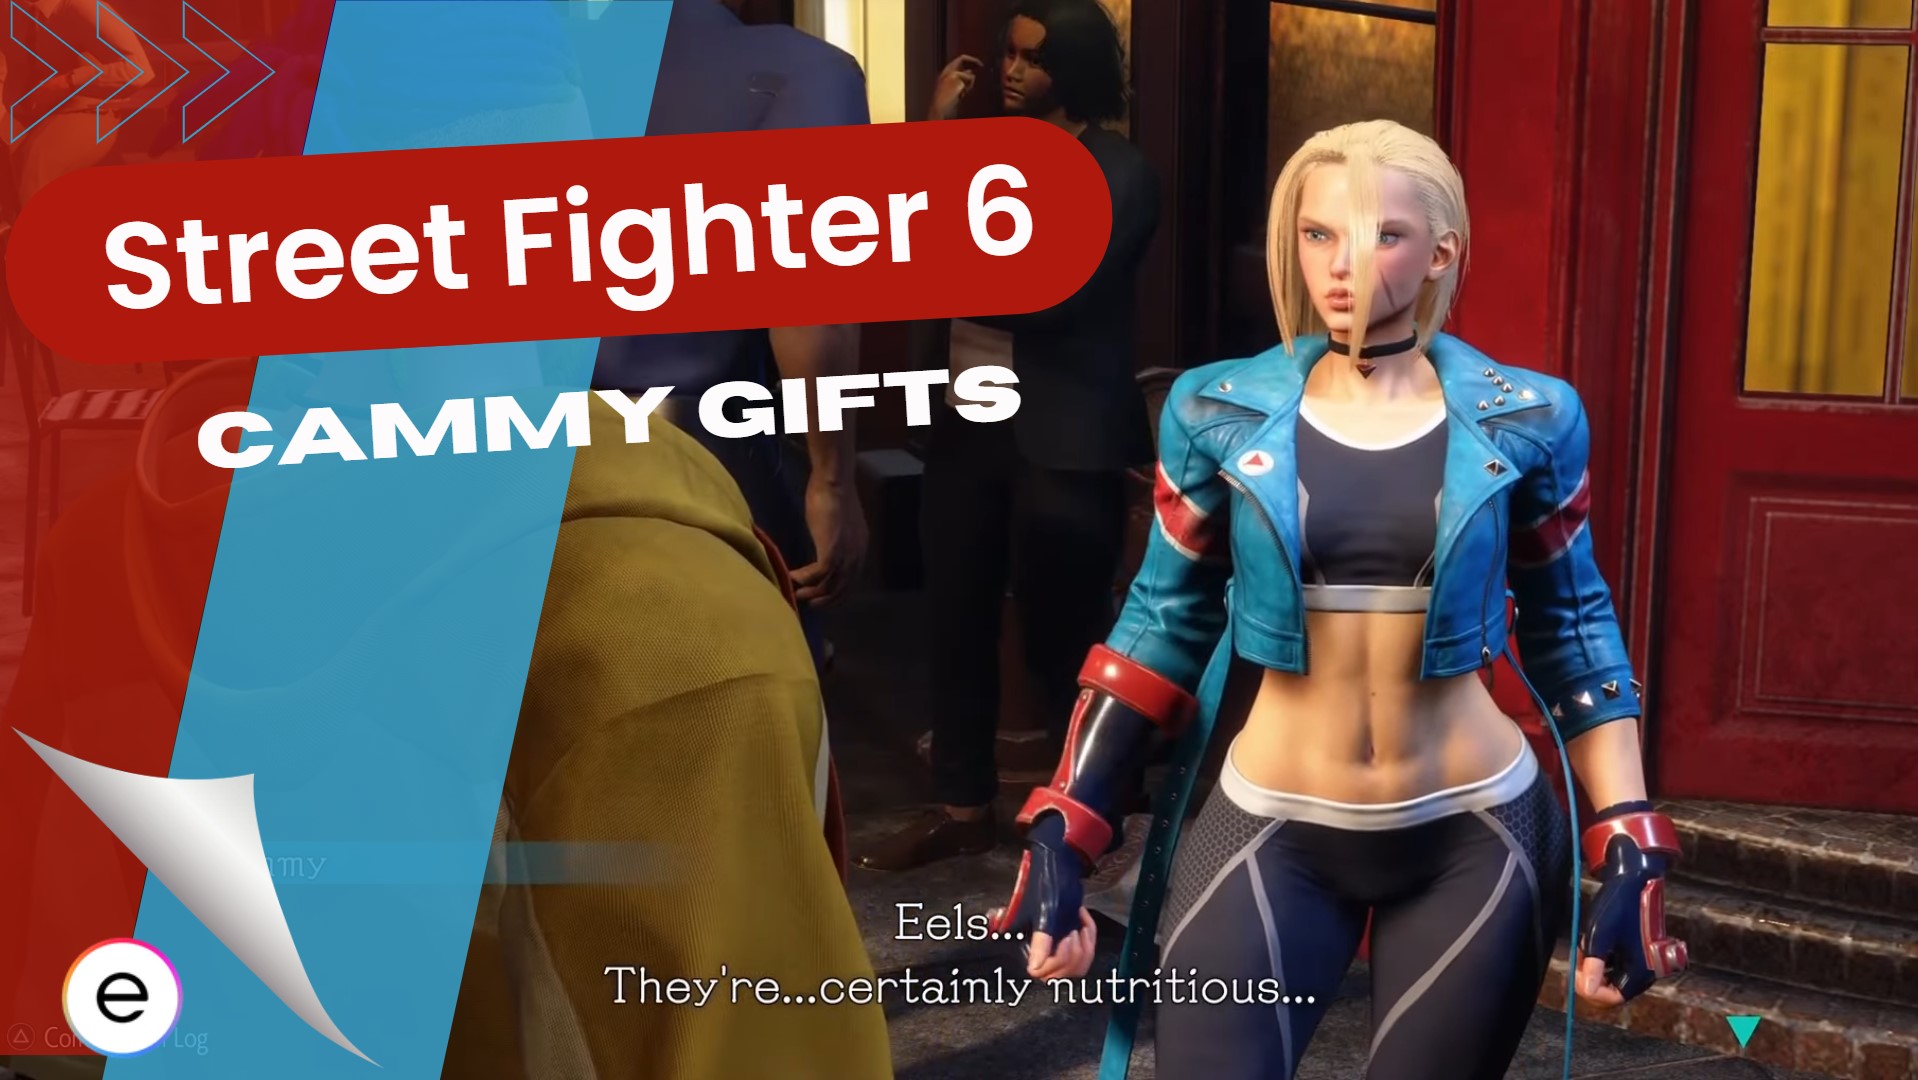 Cammy New Outfit Is Literally Way Better Than Classic! : r/StreetFighter